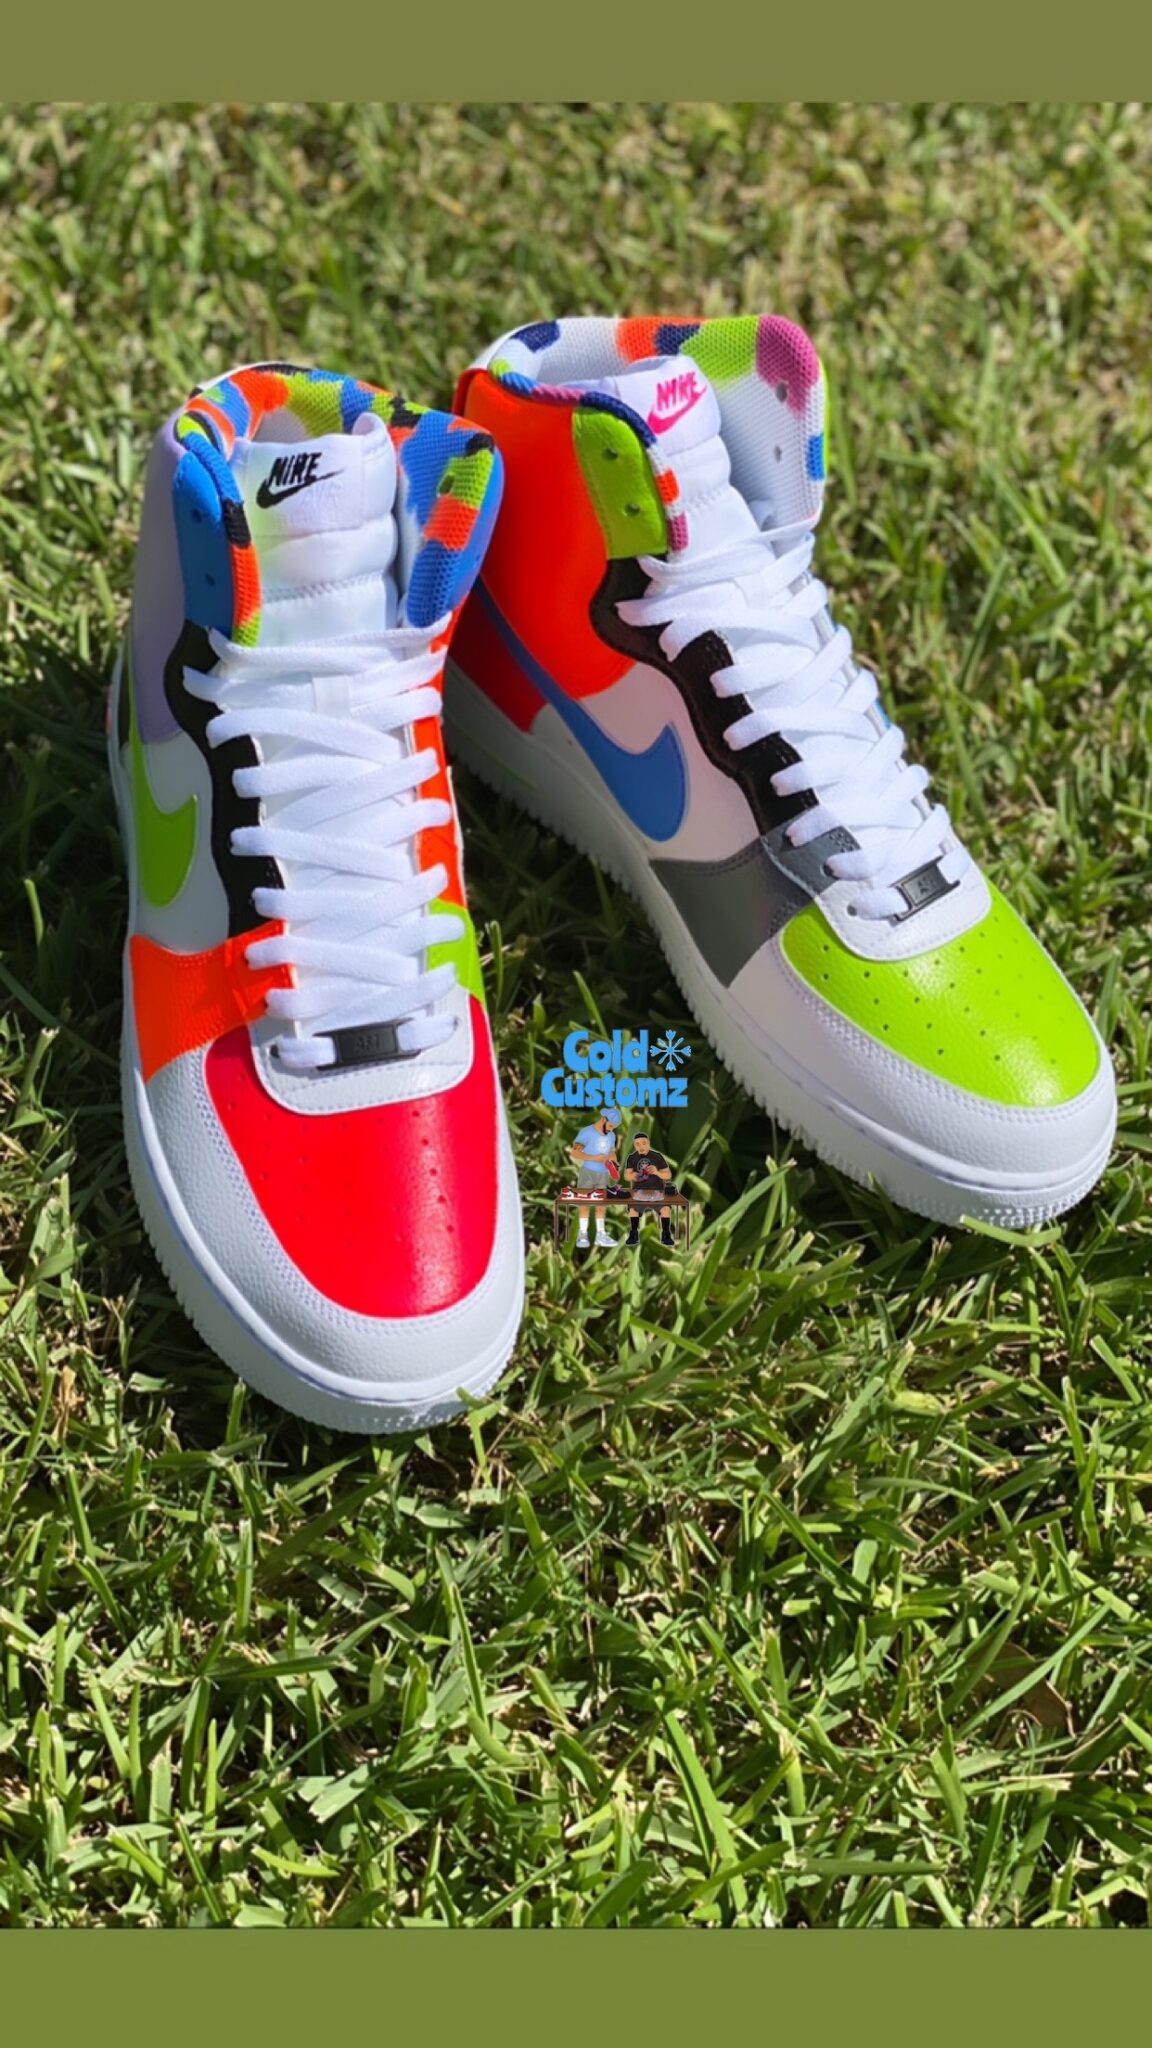 Multi Colored Air Forces - Airforce Military